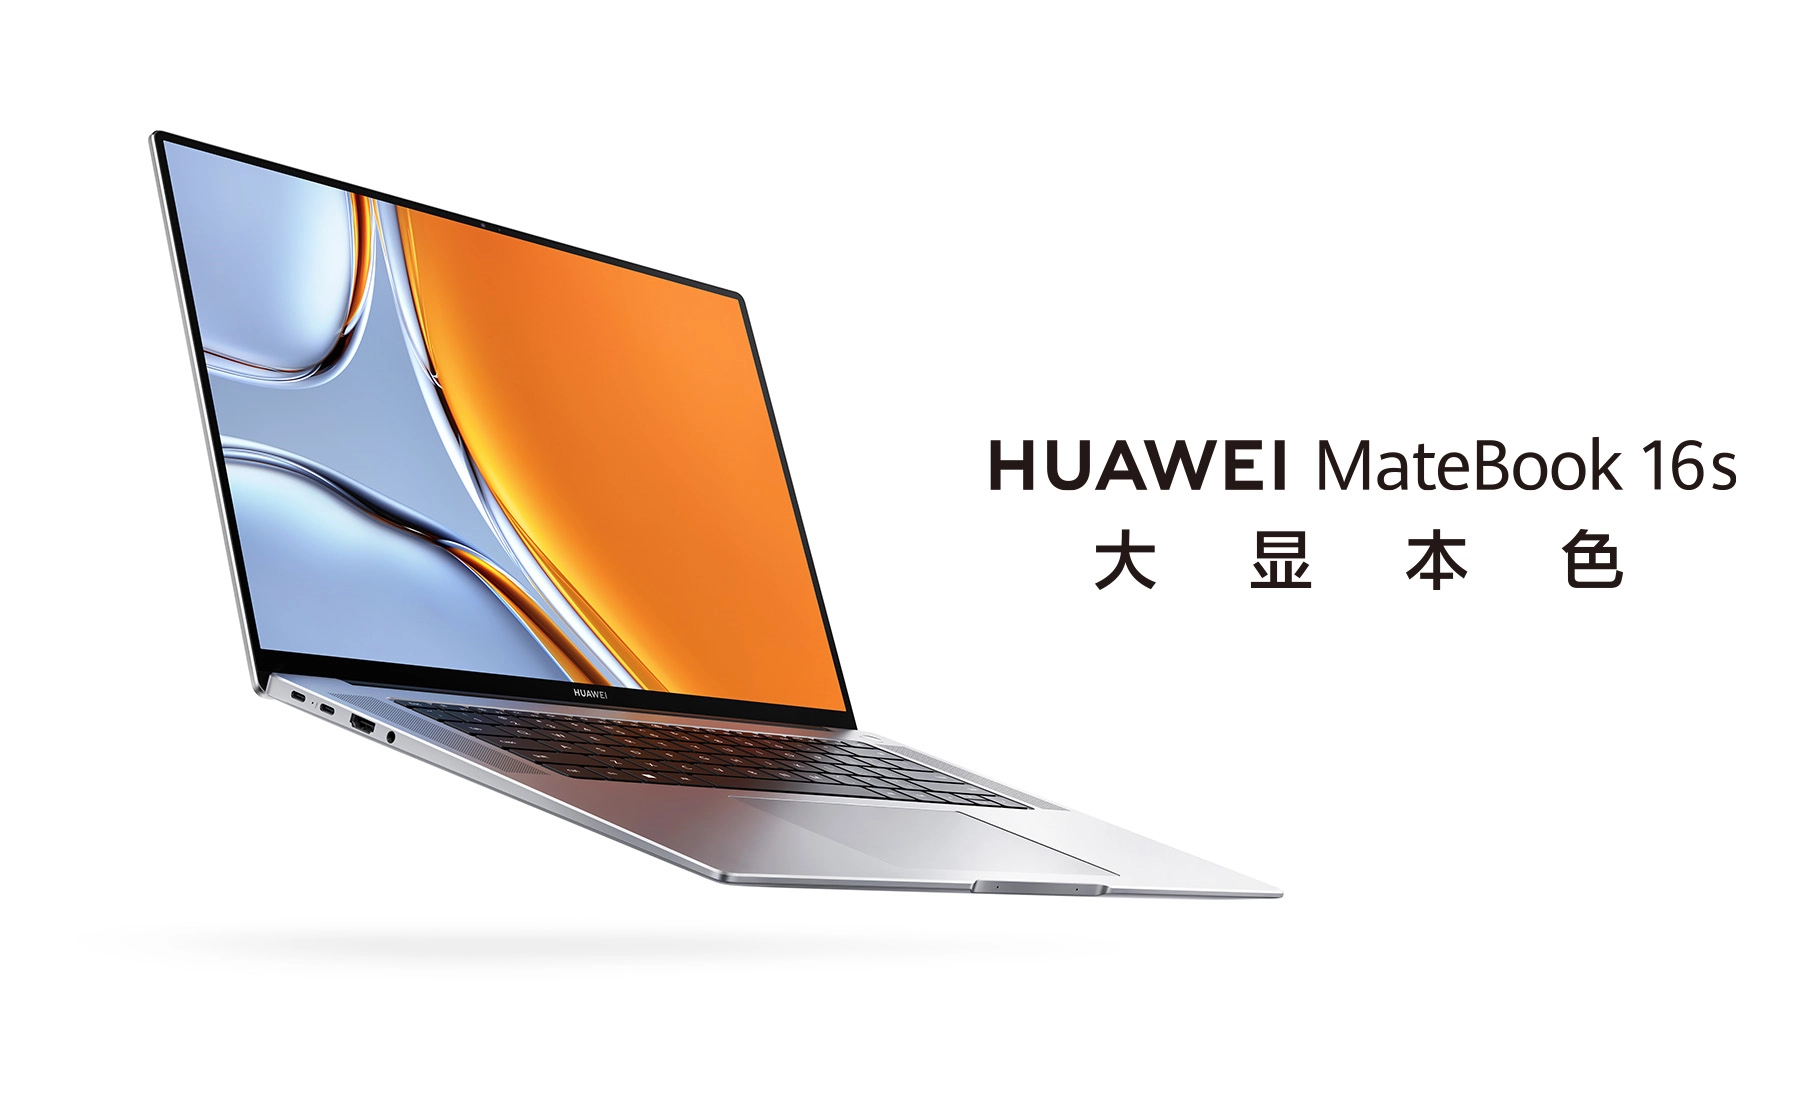 agenda verticaal levend Huawei MateBook 16s: 16-inch laptop with a 3:2 display and Intel Core  i9-12900H processor option presented that resembles the MacBook Pro 16 -  NotebookCheck.net News